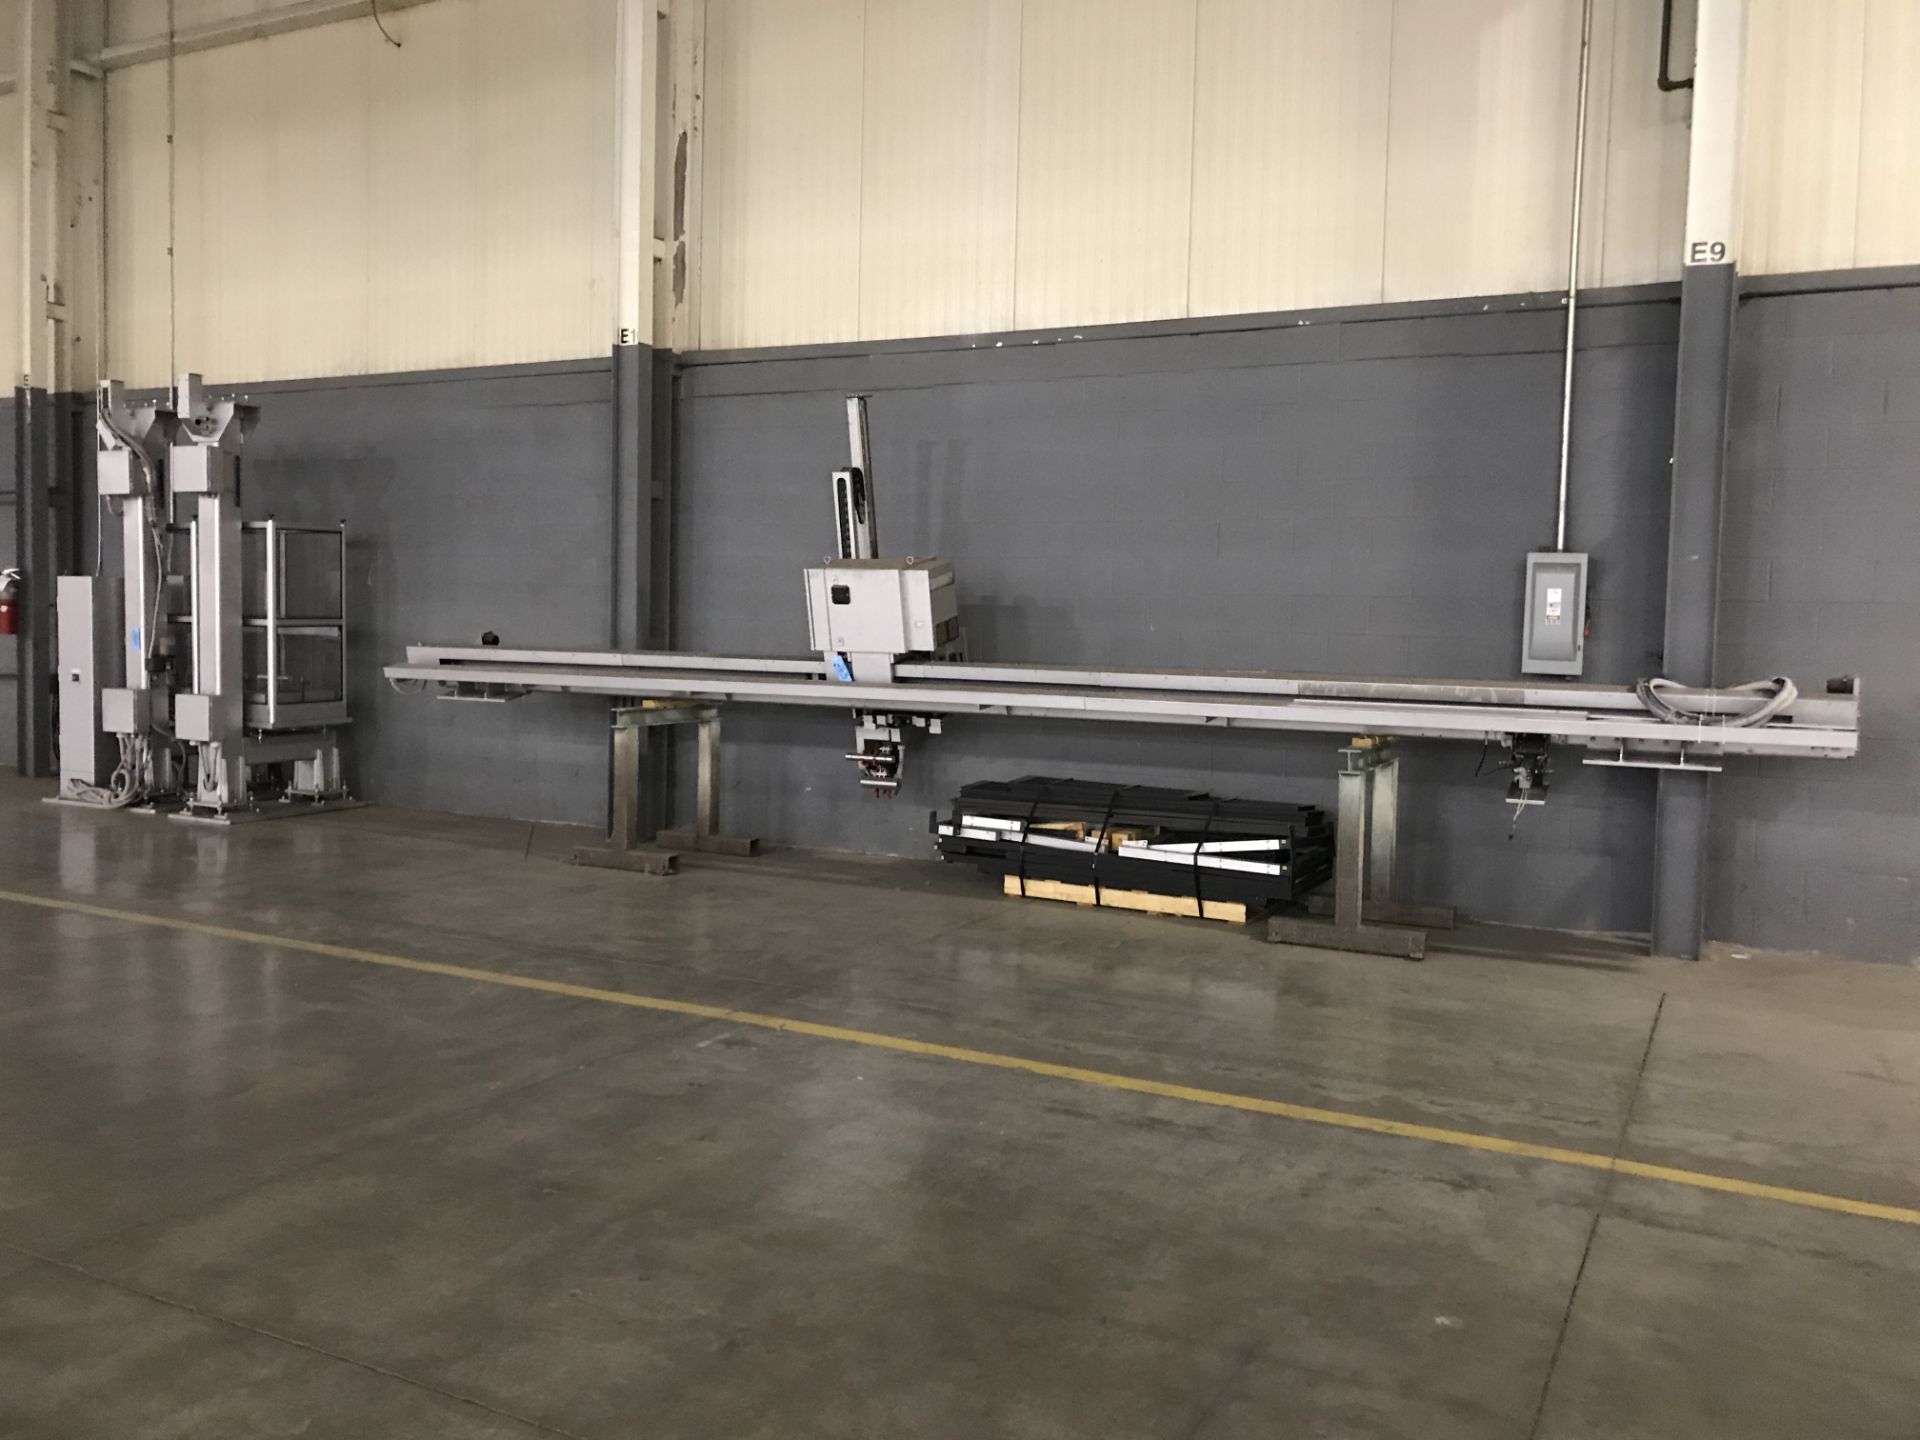 Maxrotec 24' Gantry System Complete with Mitsubishi and Fanuc Controls (Currently Dismantled)